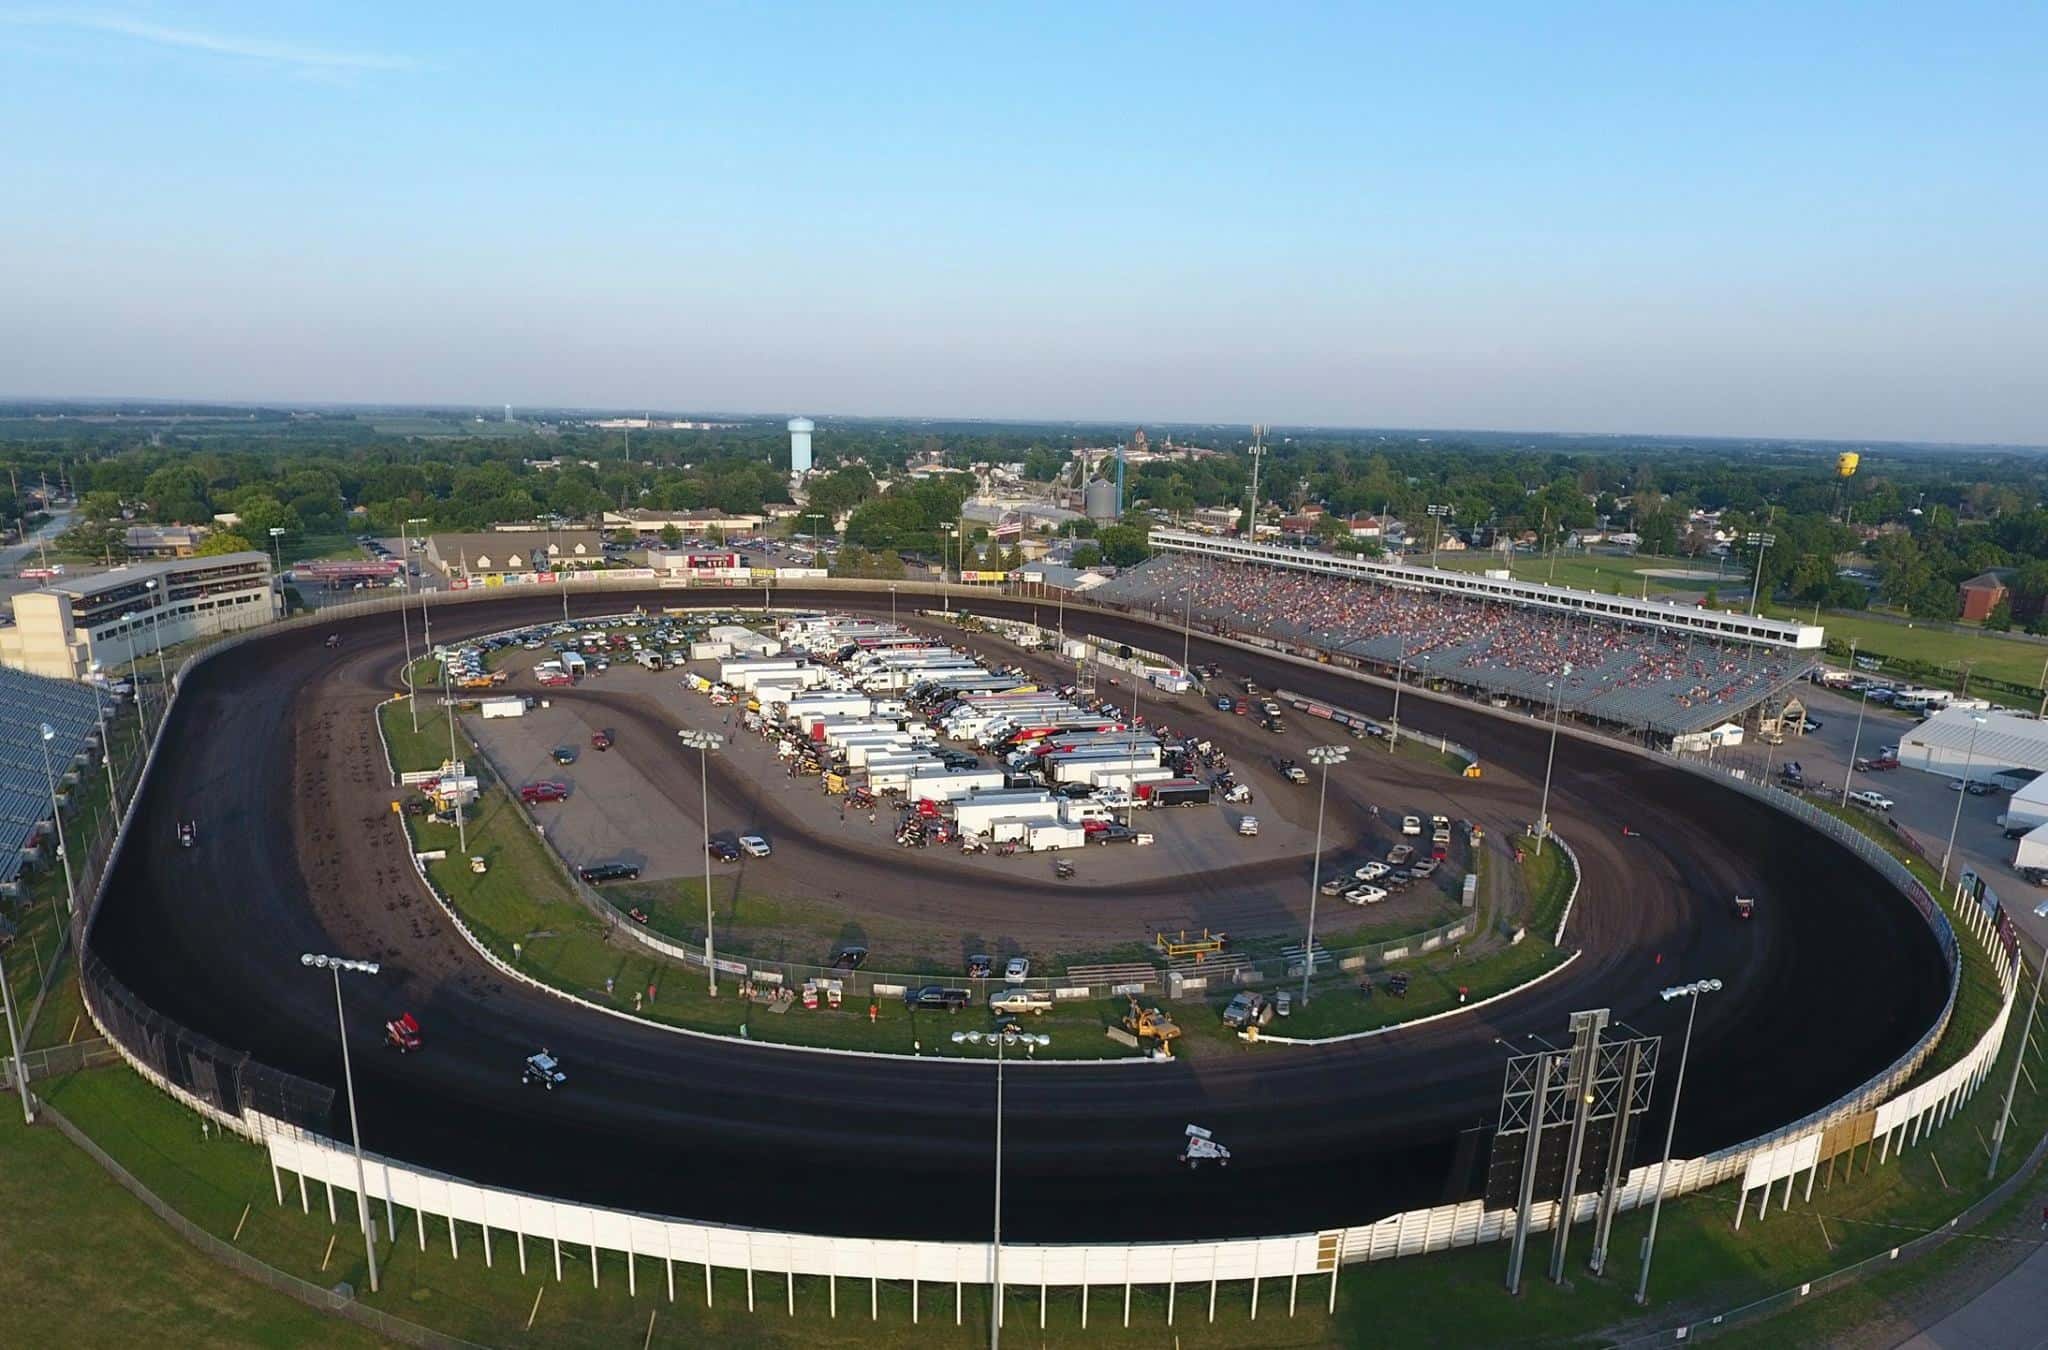 Knoxville Raceway Announces Adjustments To The 2020 Schedule | KNIA